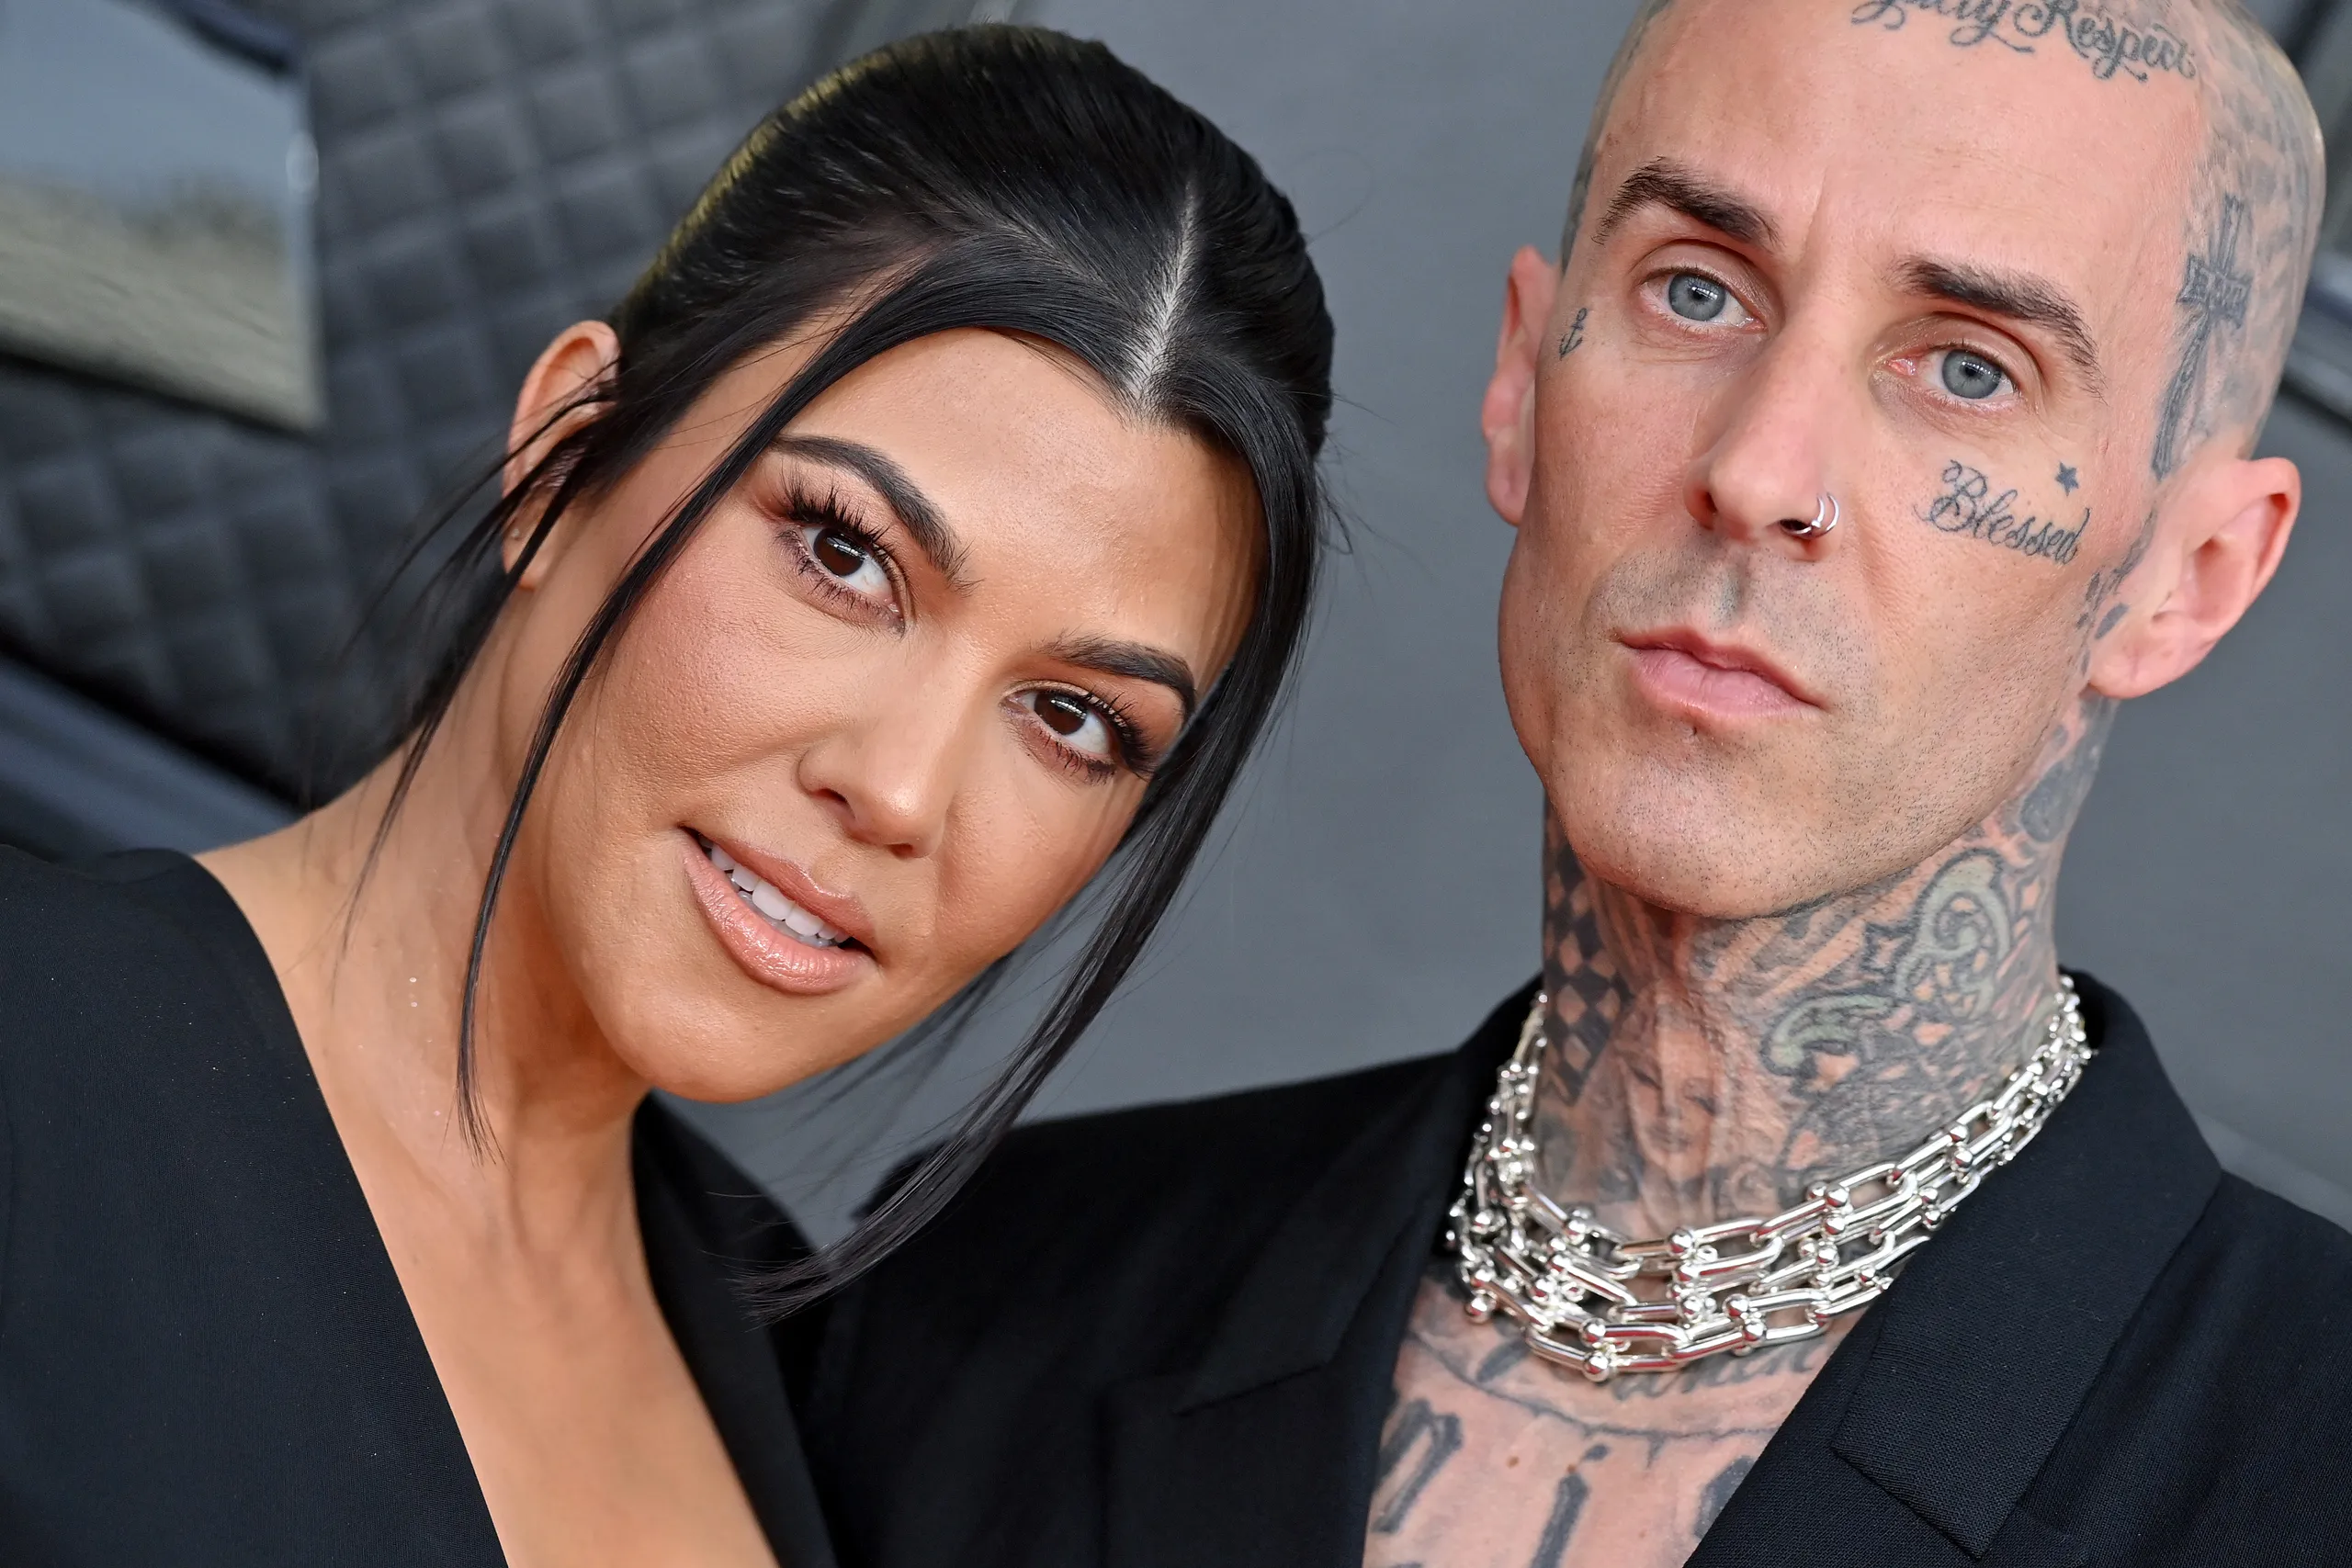 Kourtney Kardashian and Travis Barker Welcome First Baby Together: Sources